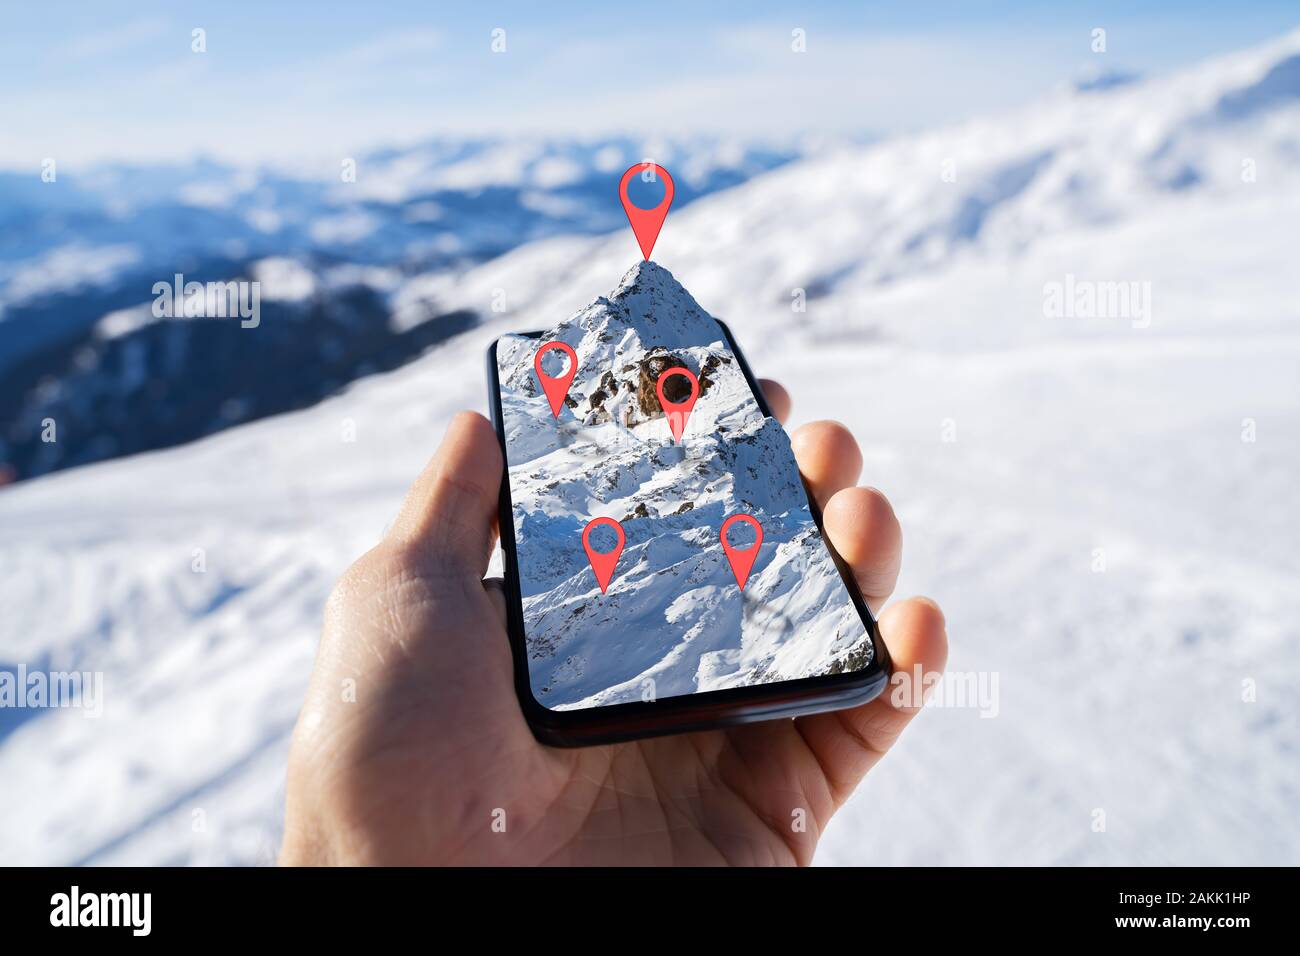 Person's Hand Holding Mobile Phone With Mountain Map Against Blurred Snowy Background Stock Photo